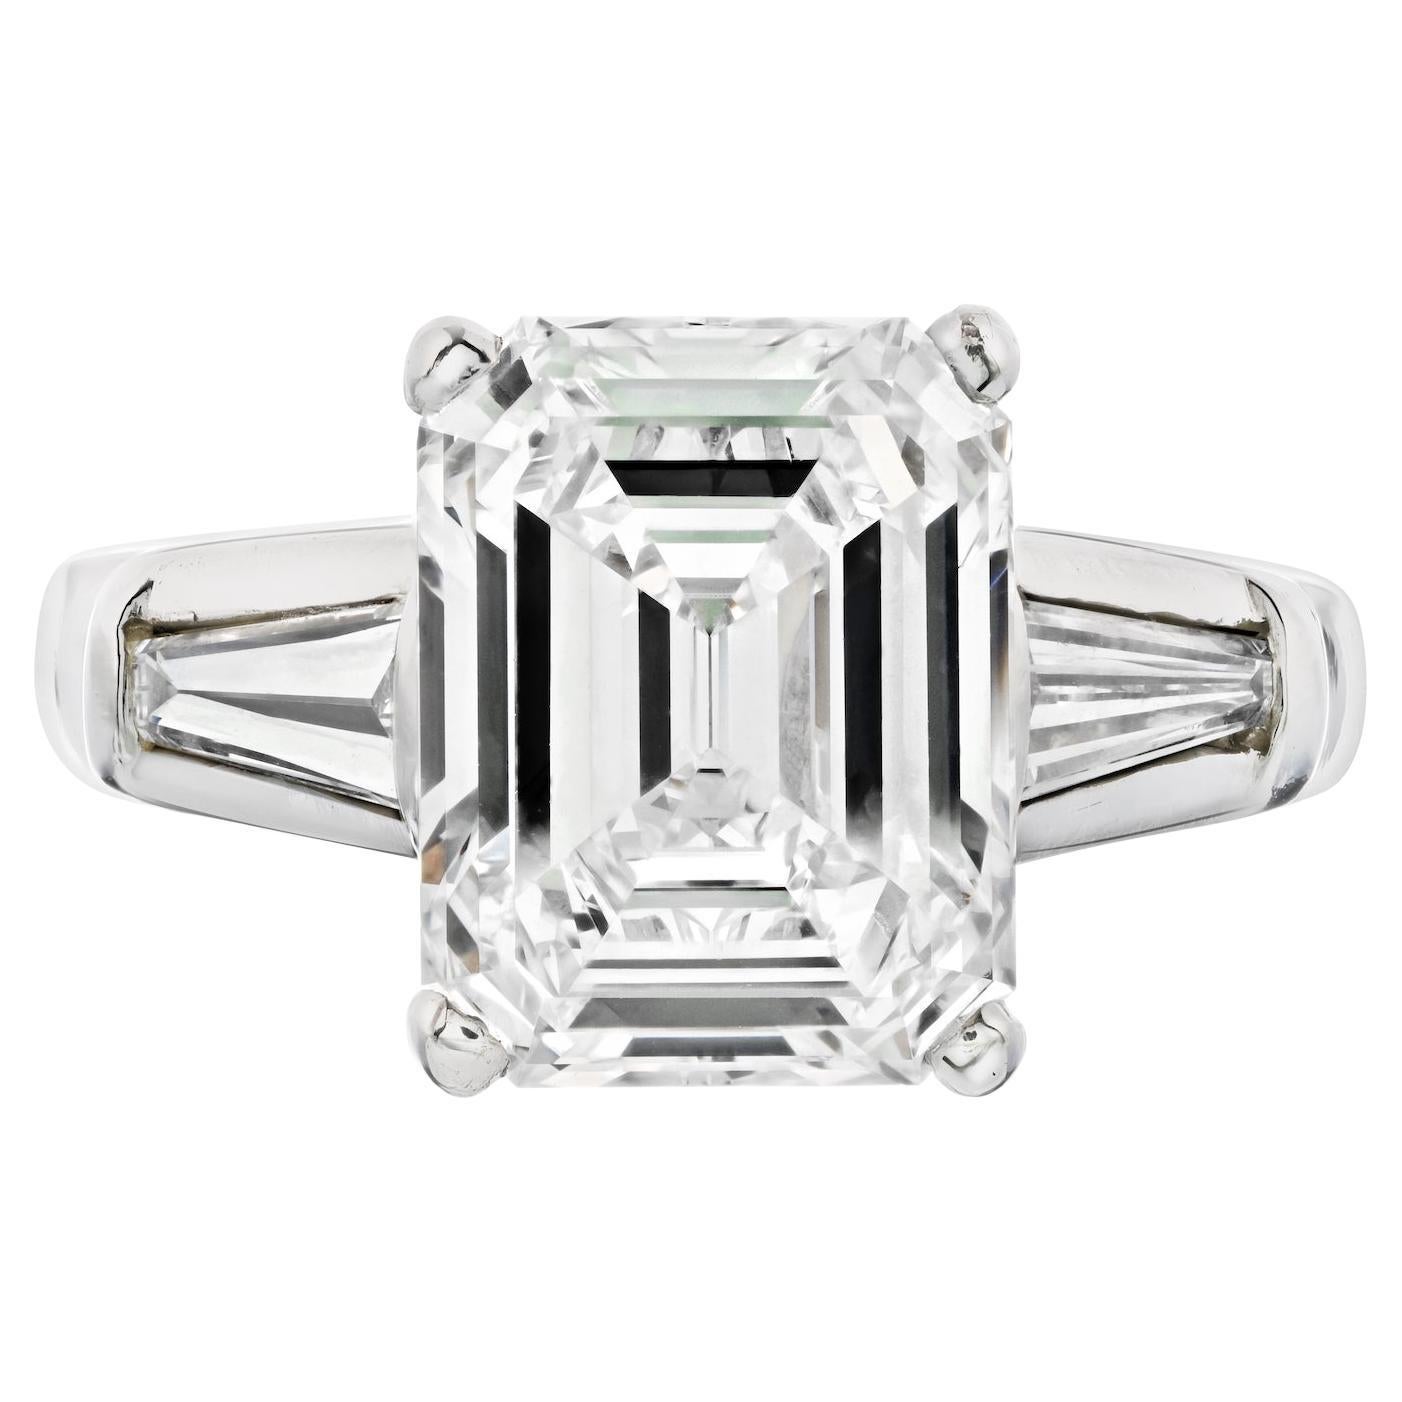 4 Carat Emerald Cut Diamond GIA with Baguettes Engagement Ring